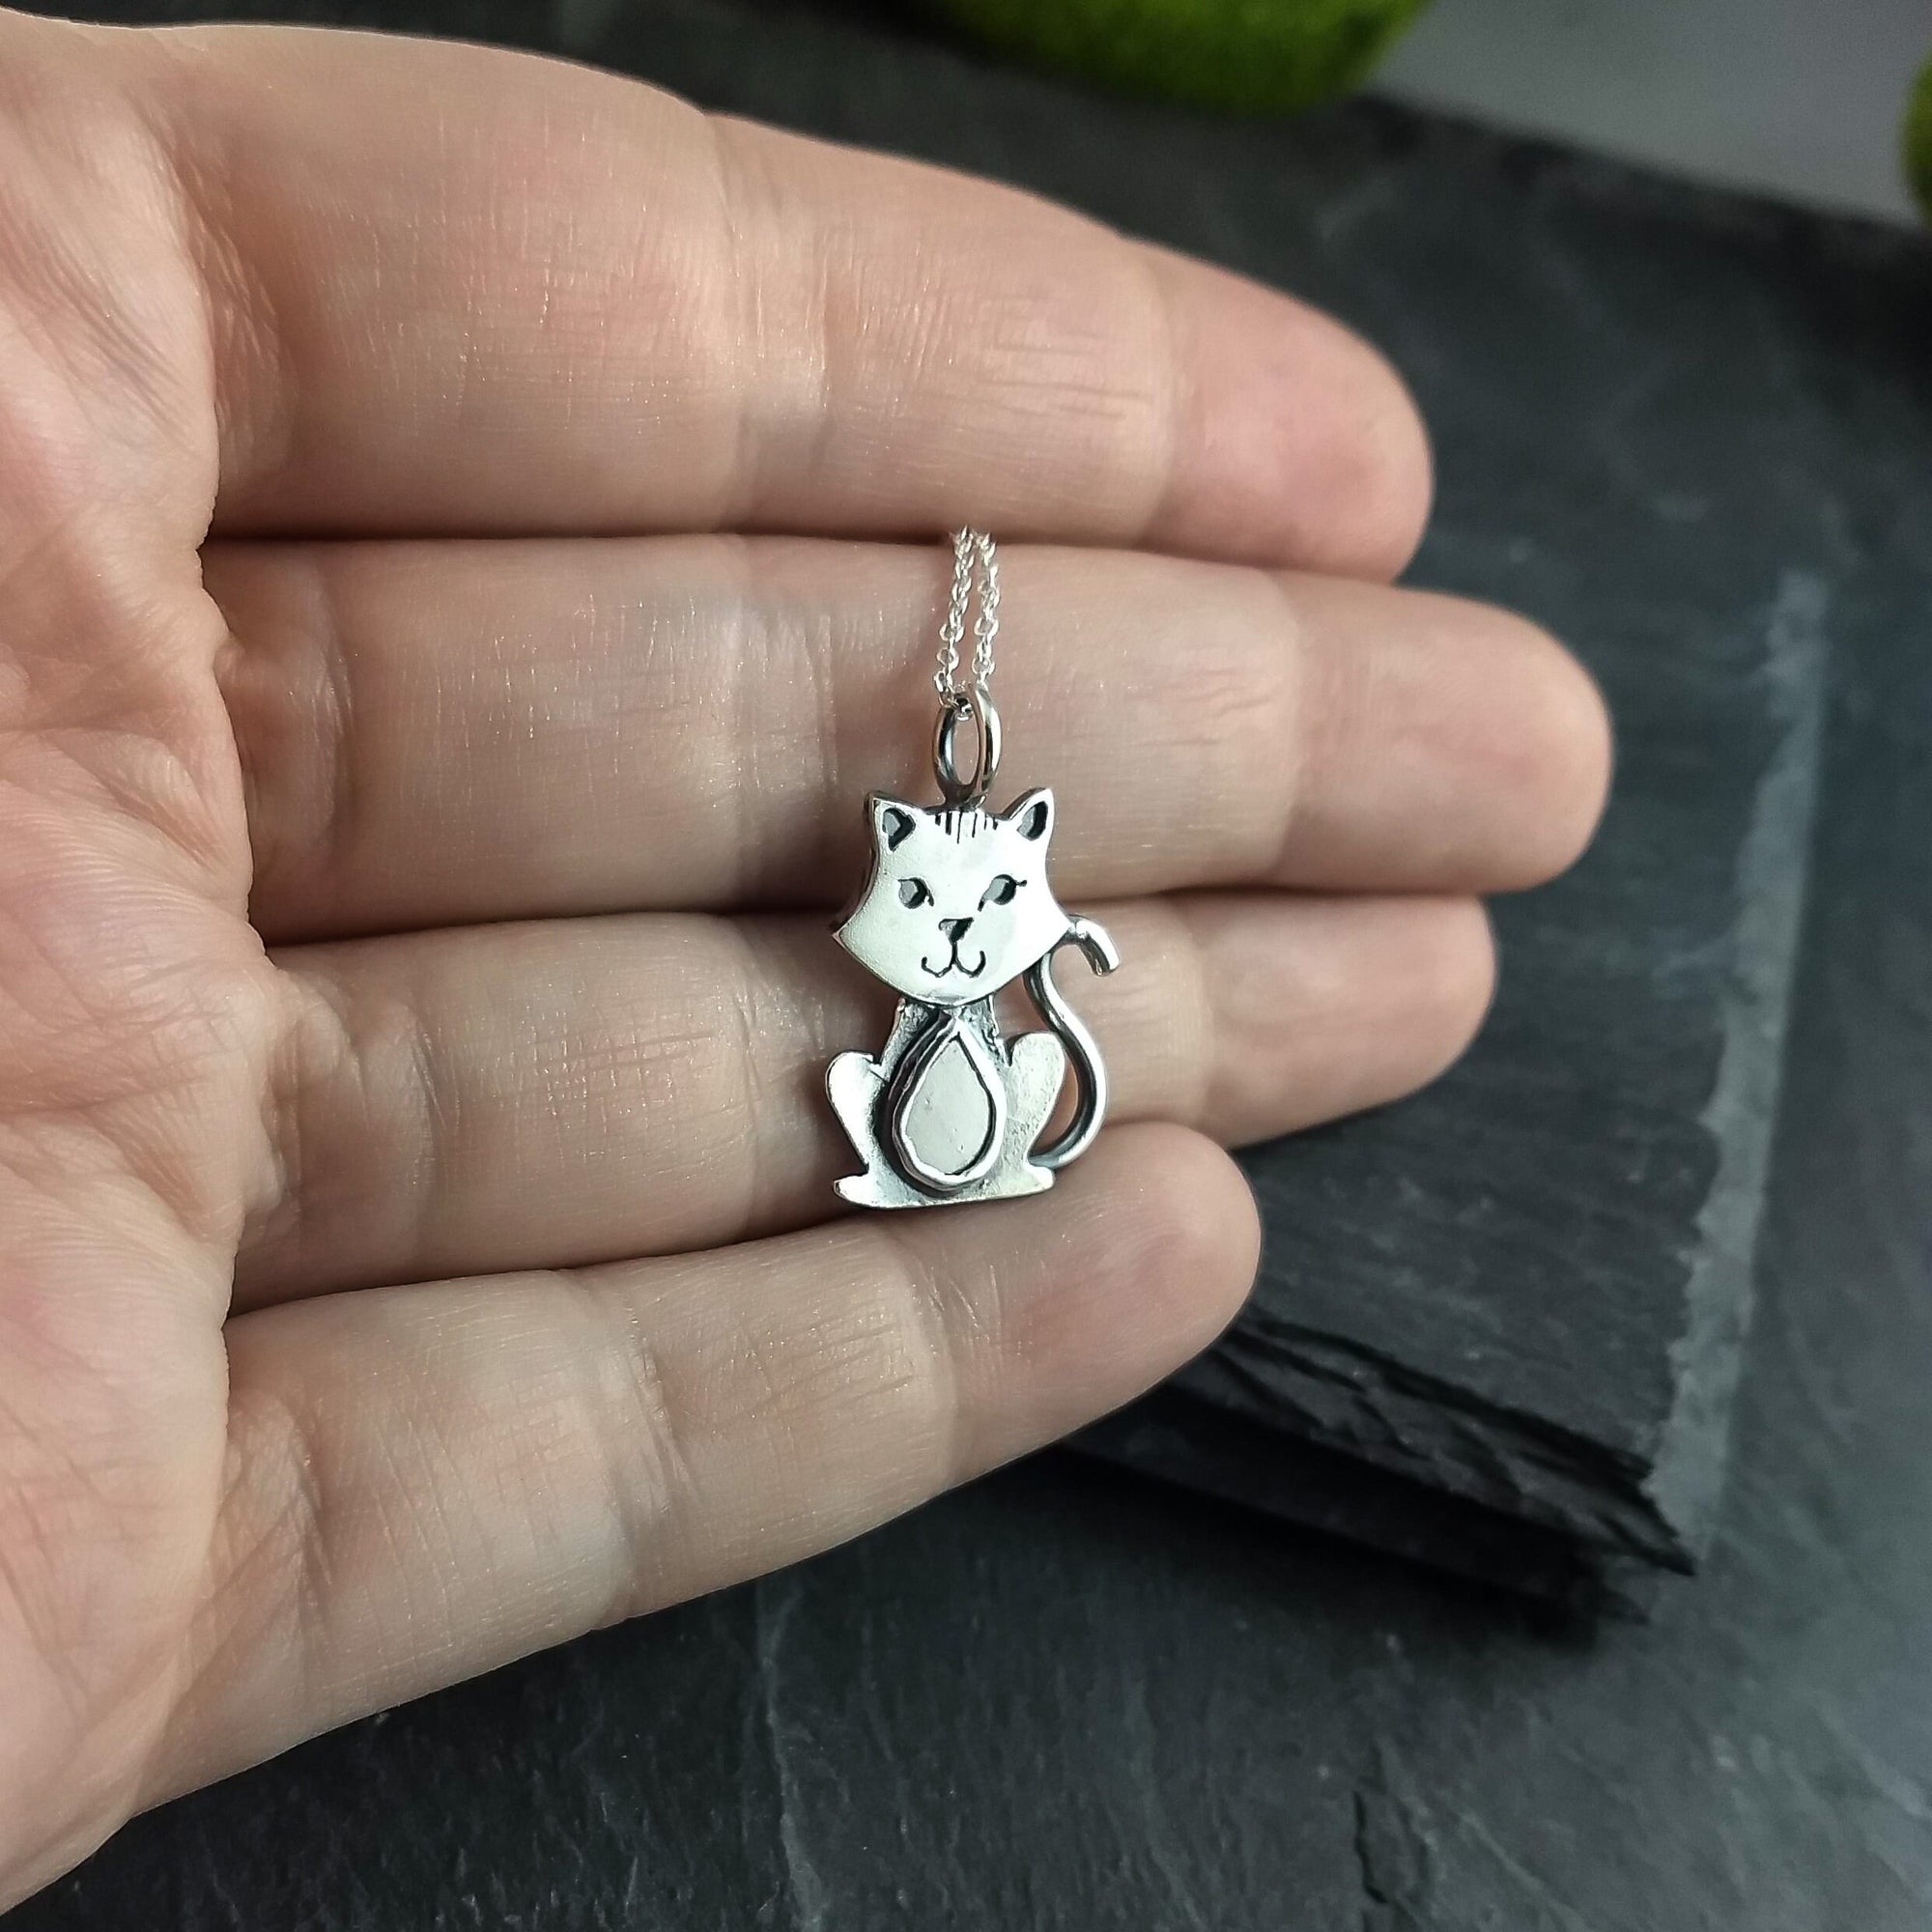 Sterling silver cat pendant